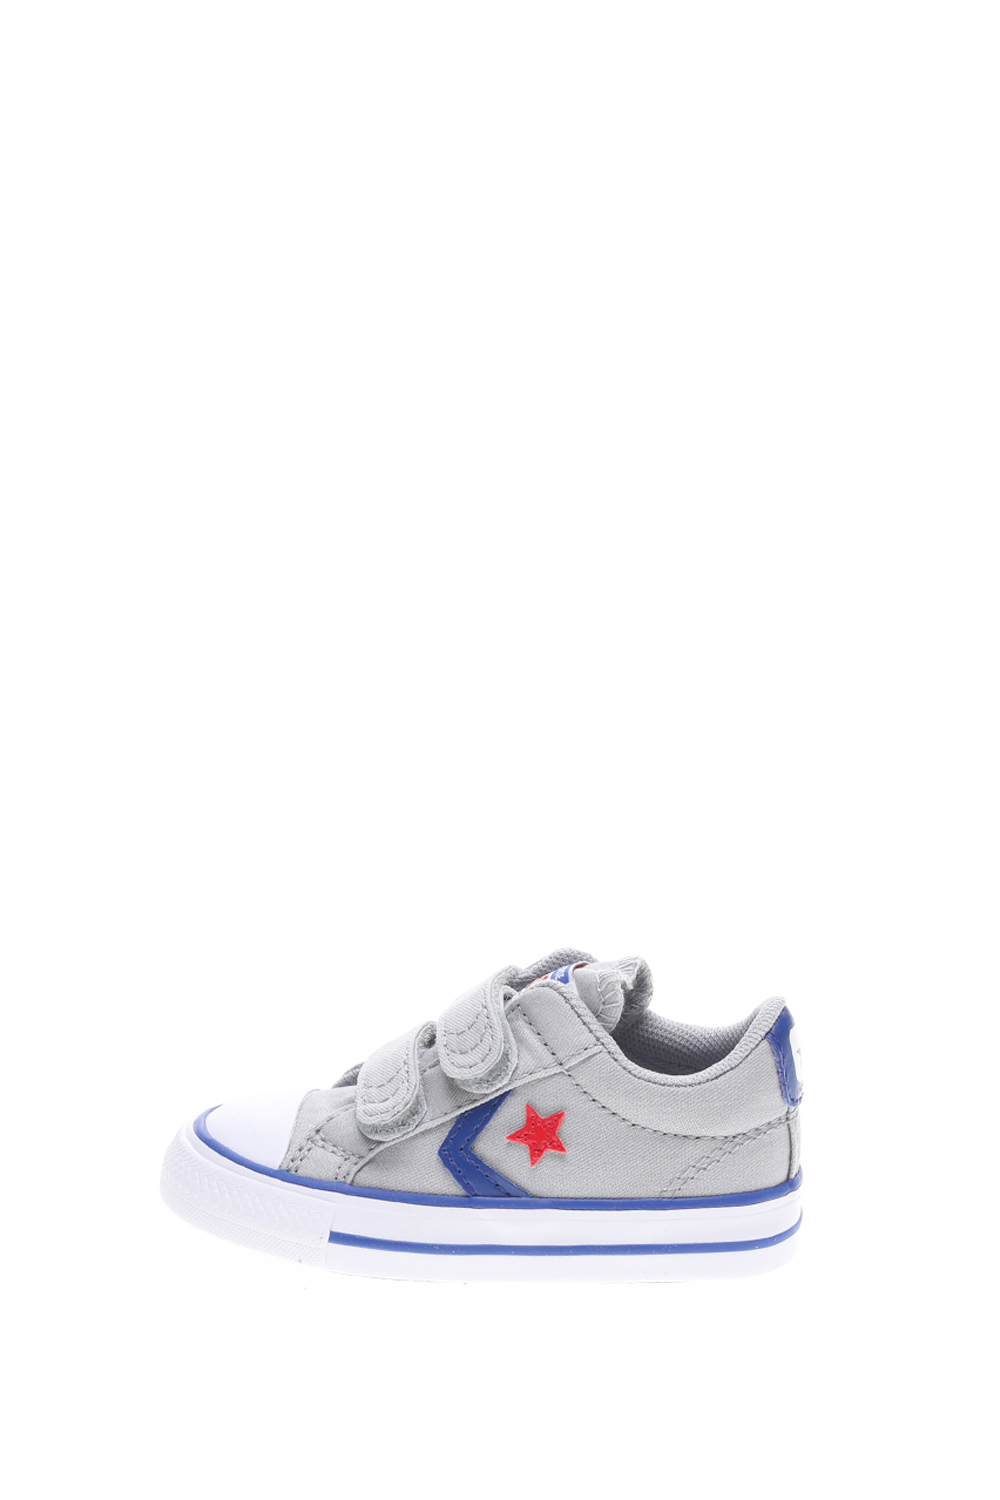 CONVERSE - Βρεφικά sneakers Converse Star Player 2V Ox γκρι Παιδικά/Baby/Παπούτσια/Sneakers